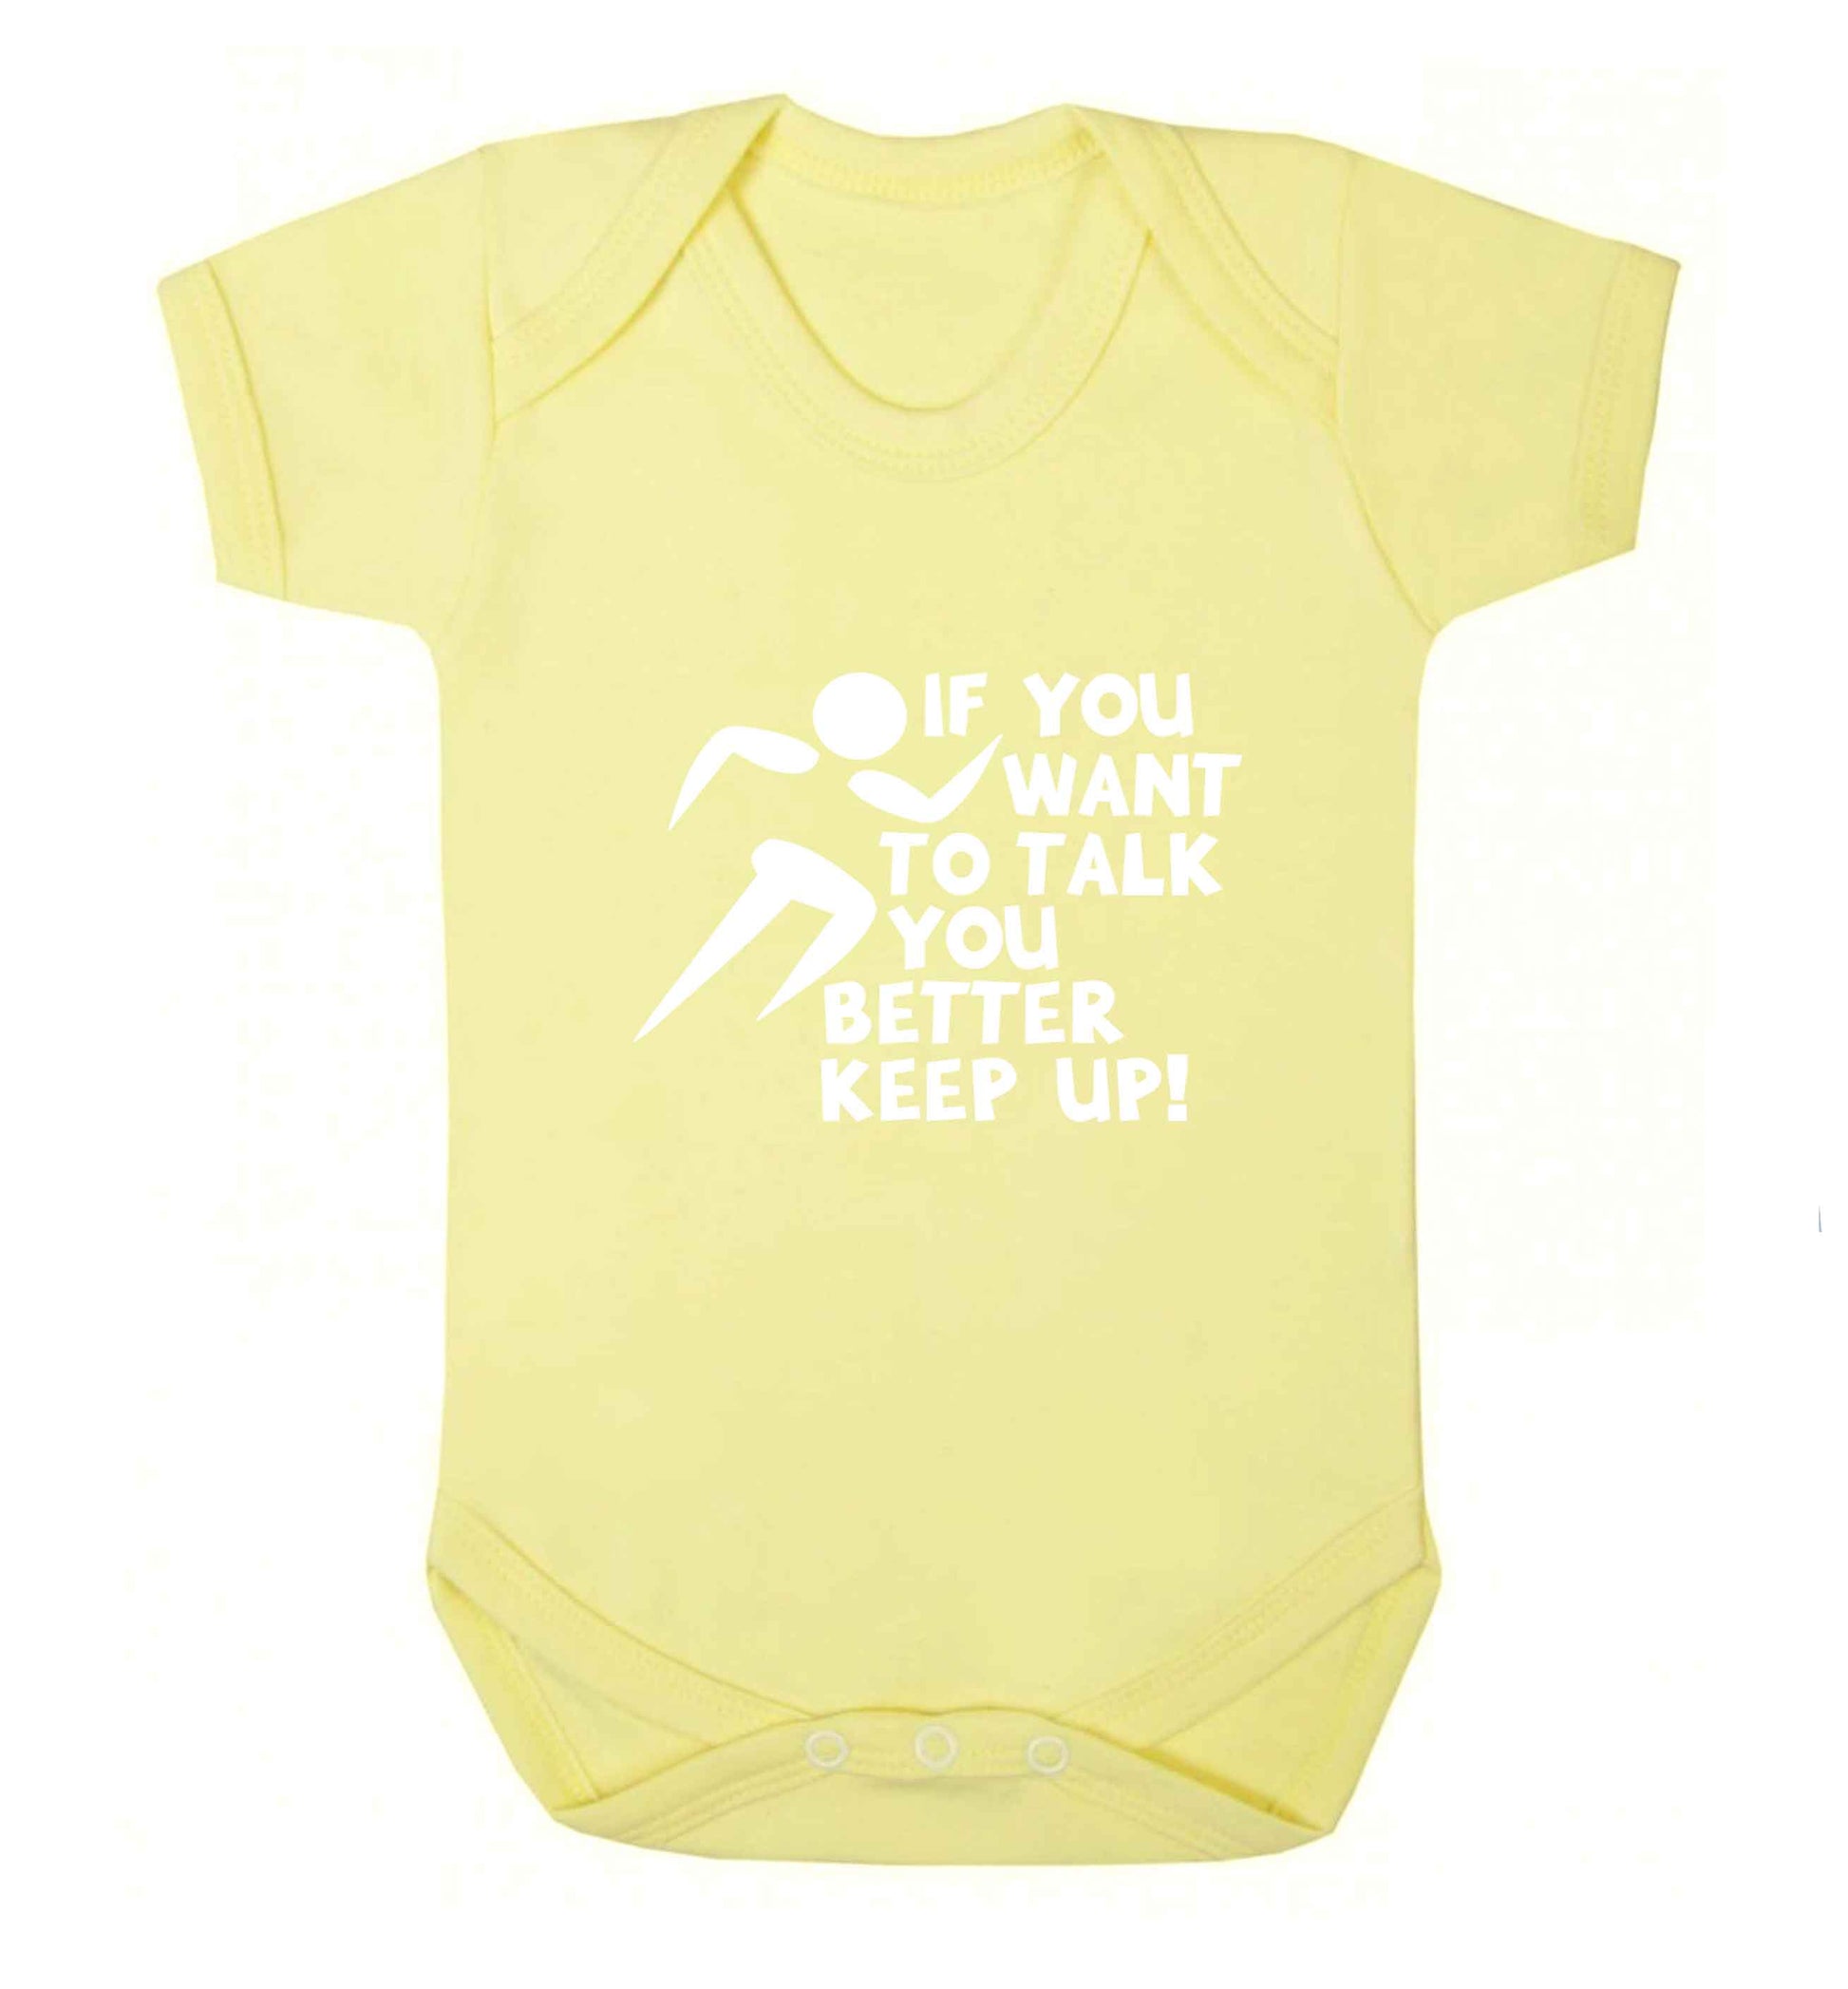 If you want to talk you better keep up! baby vest pale yellow 18-24 months